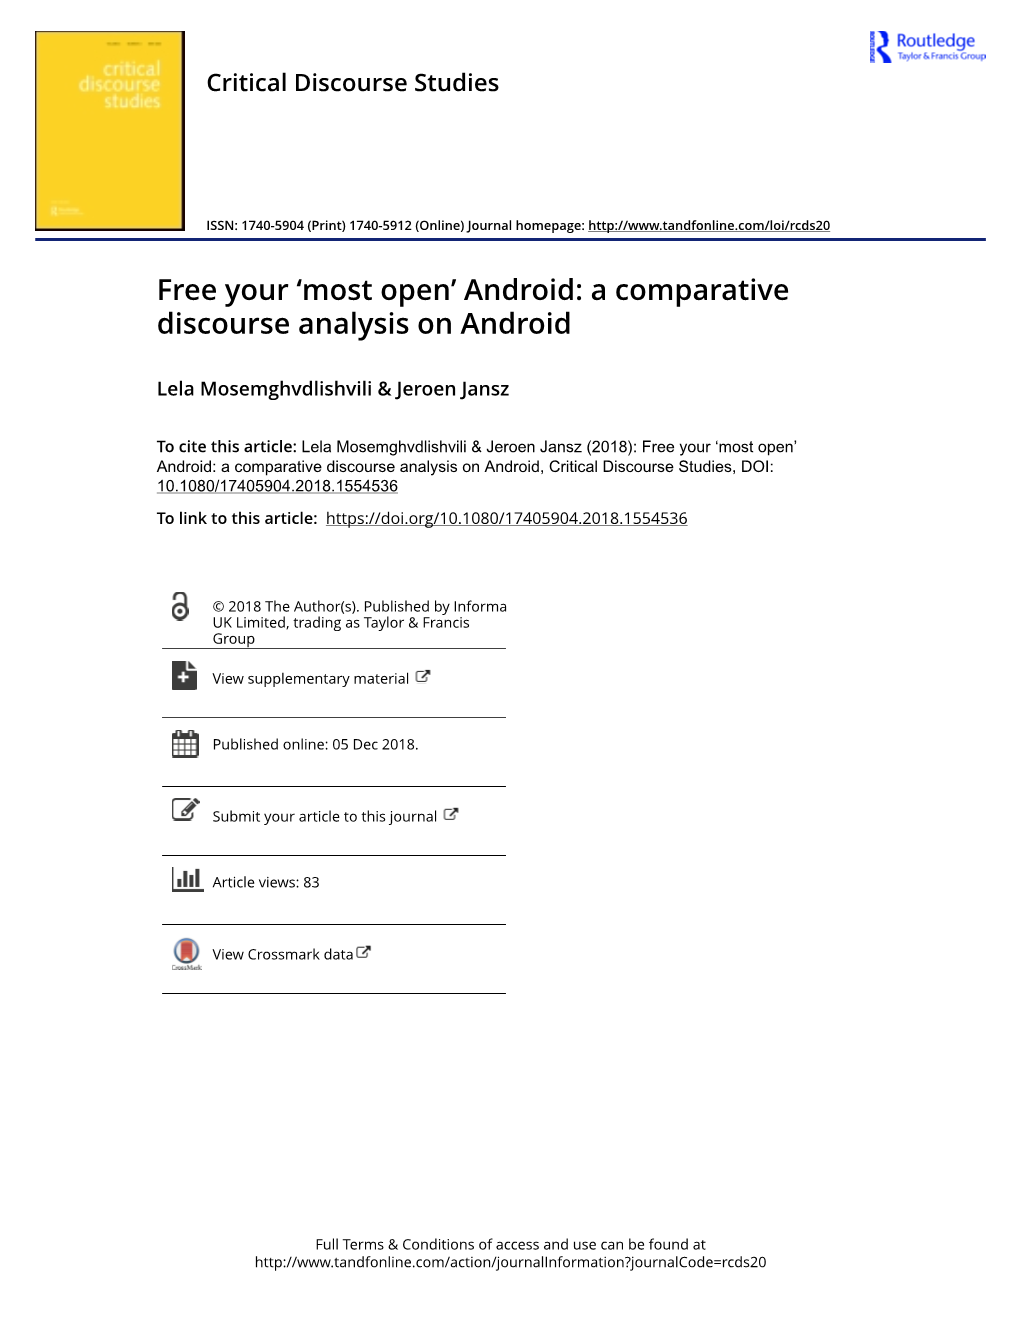 A Comparative Discourse Analysis on Android